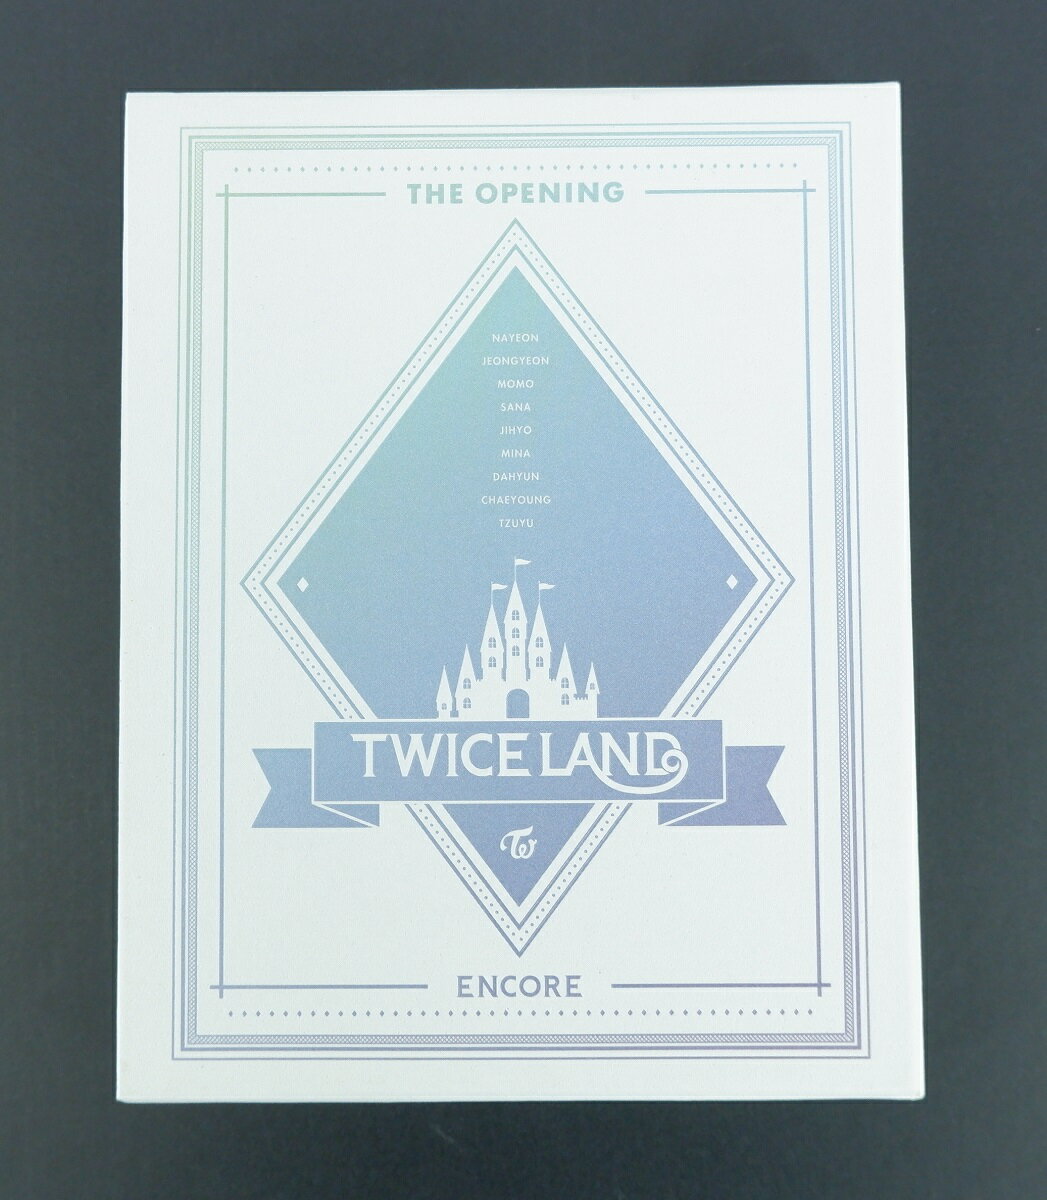 TWICE 1ST TOUR ‘TWICELAND’ THE OPENING ENCORE 輸入盤 【Blu-ray】